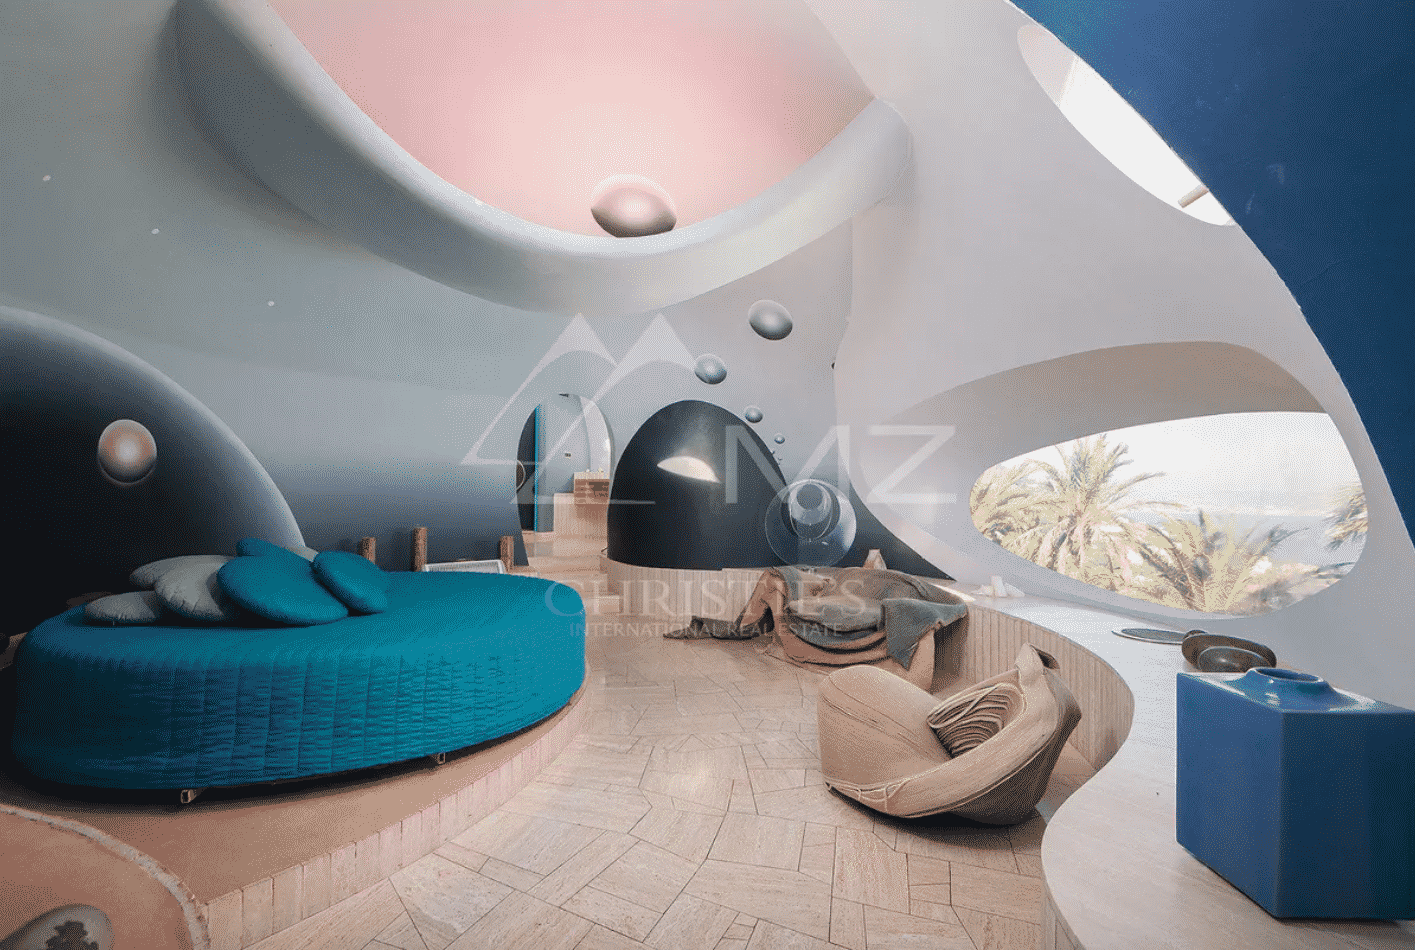 The Bubble Palace bedroom design